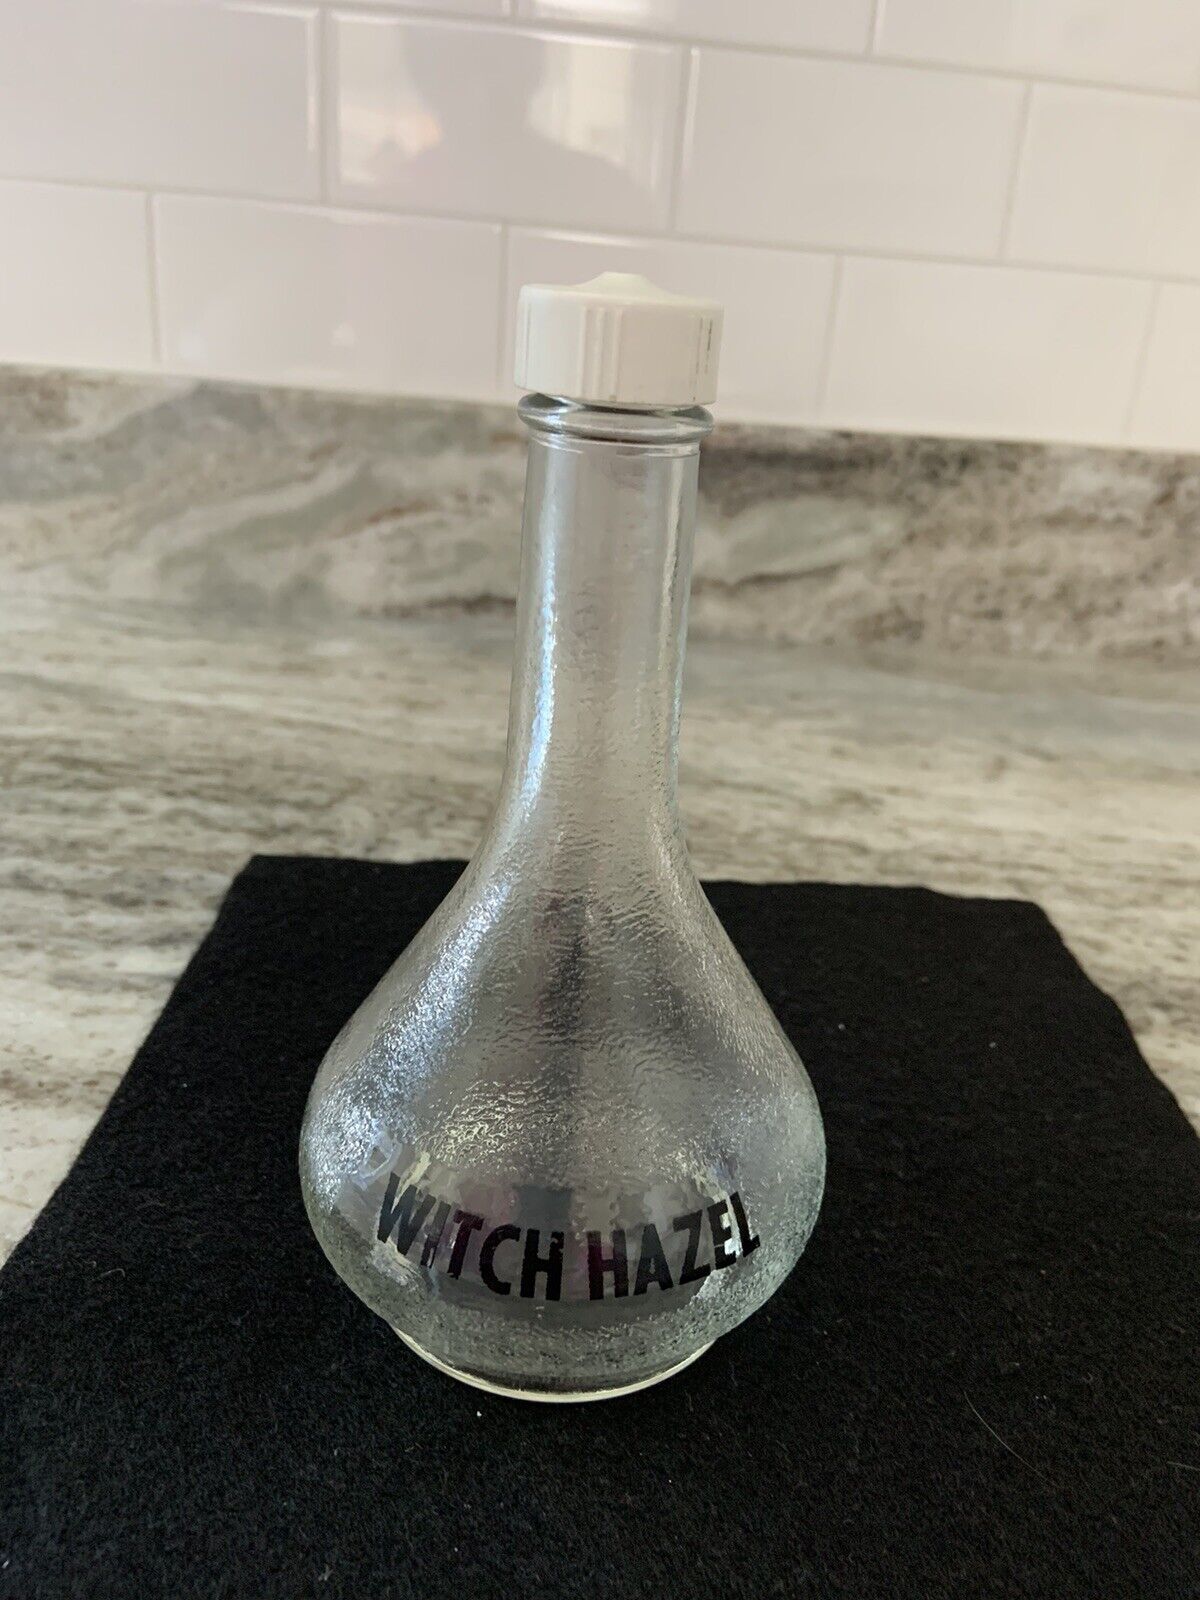 OLD WITCH HAZEL TEXTURED GLASS BOTTLE FOR APOTHECARY OR BARBER SPLASH TOP